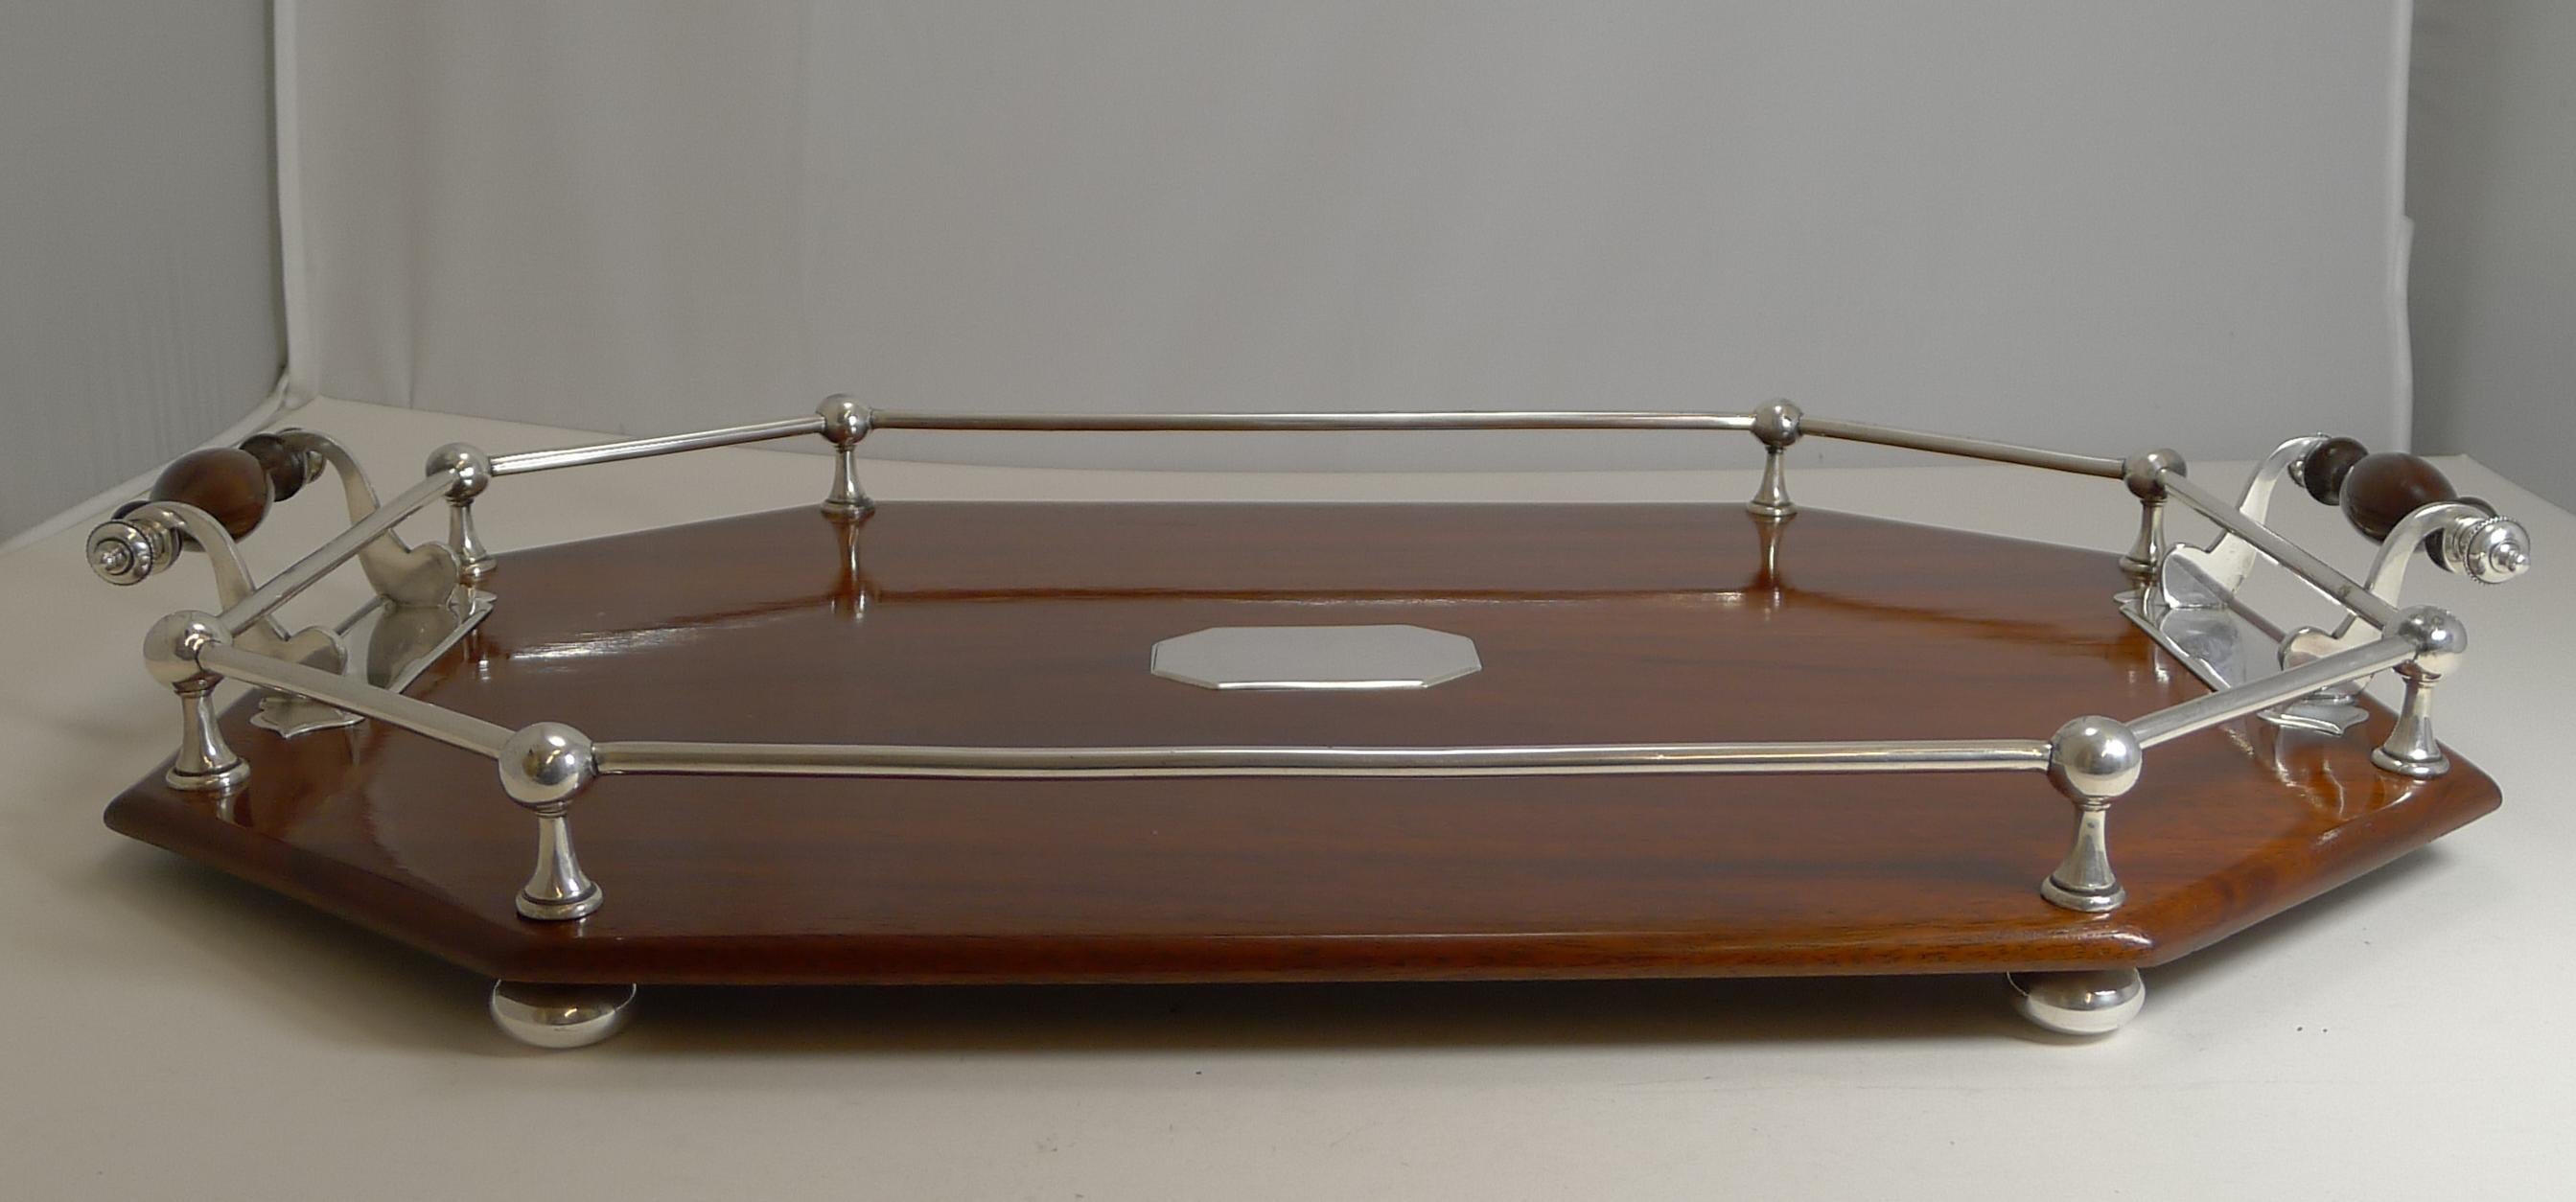 Edwardian Antique English Mahogany and Silver Plate Drinks / Cocktail Tray, circa 1900